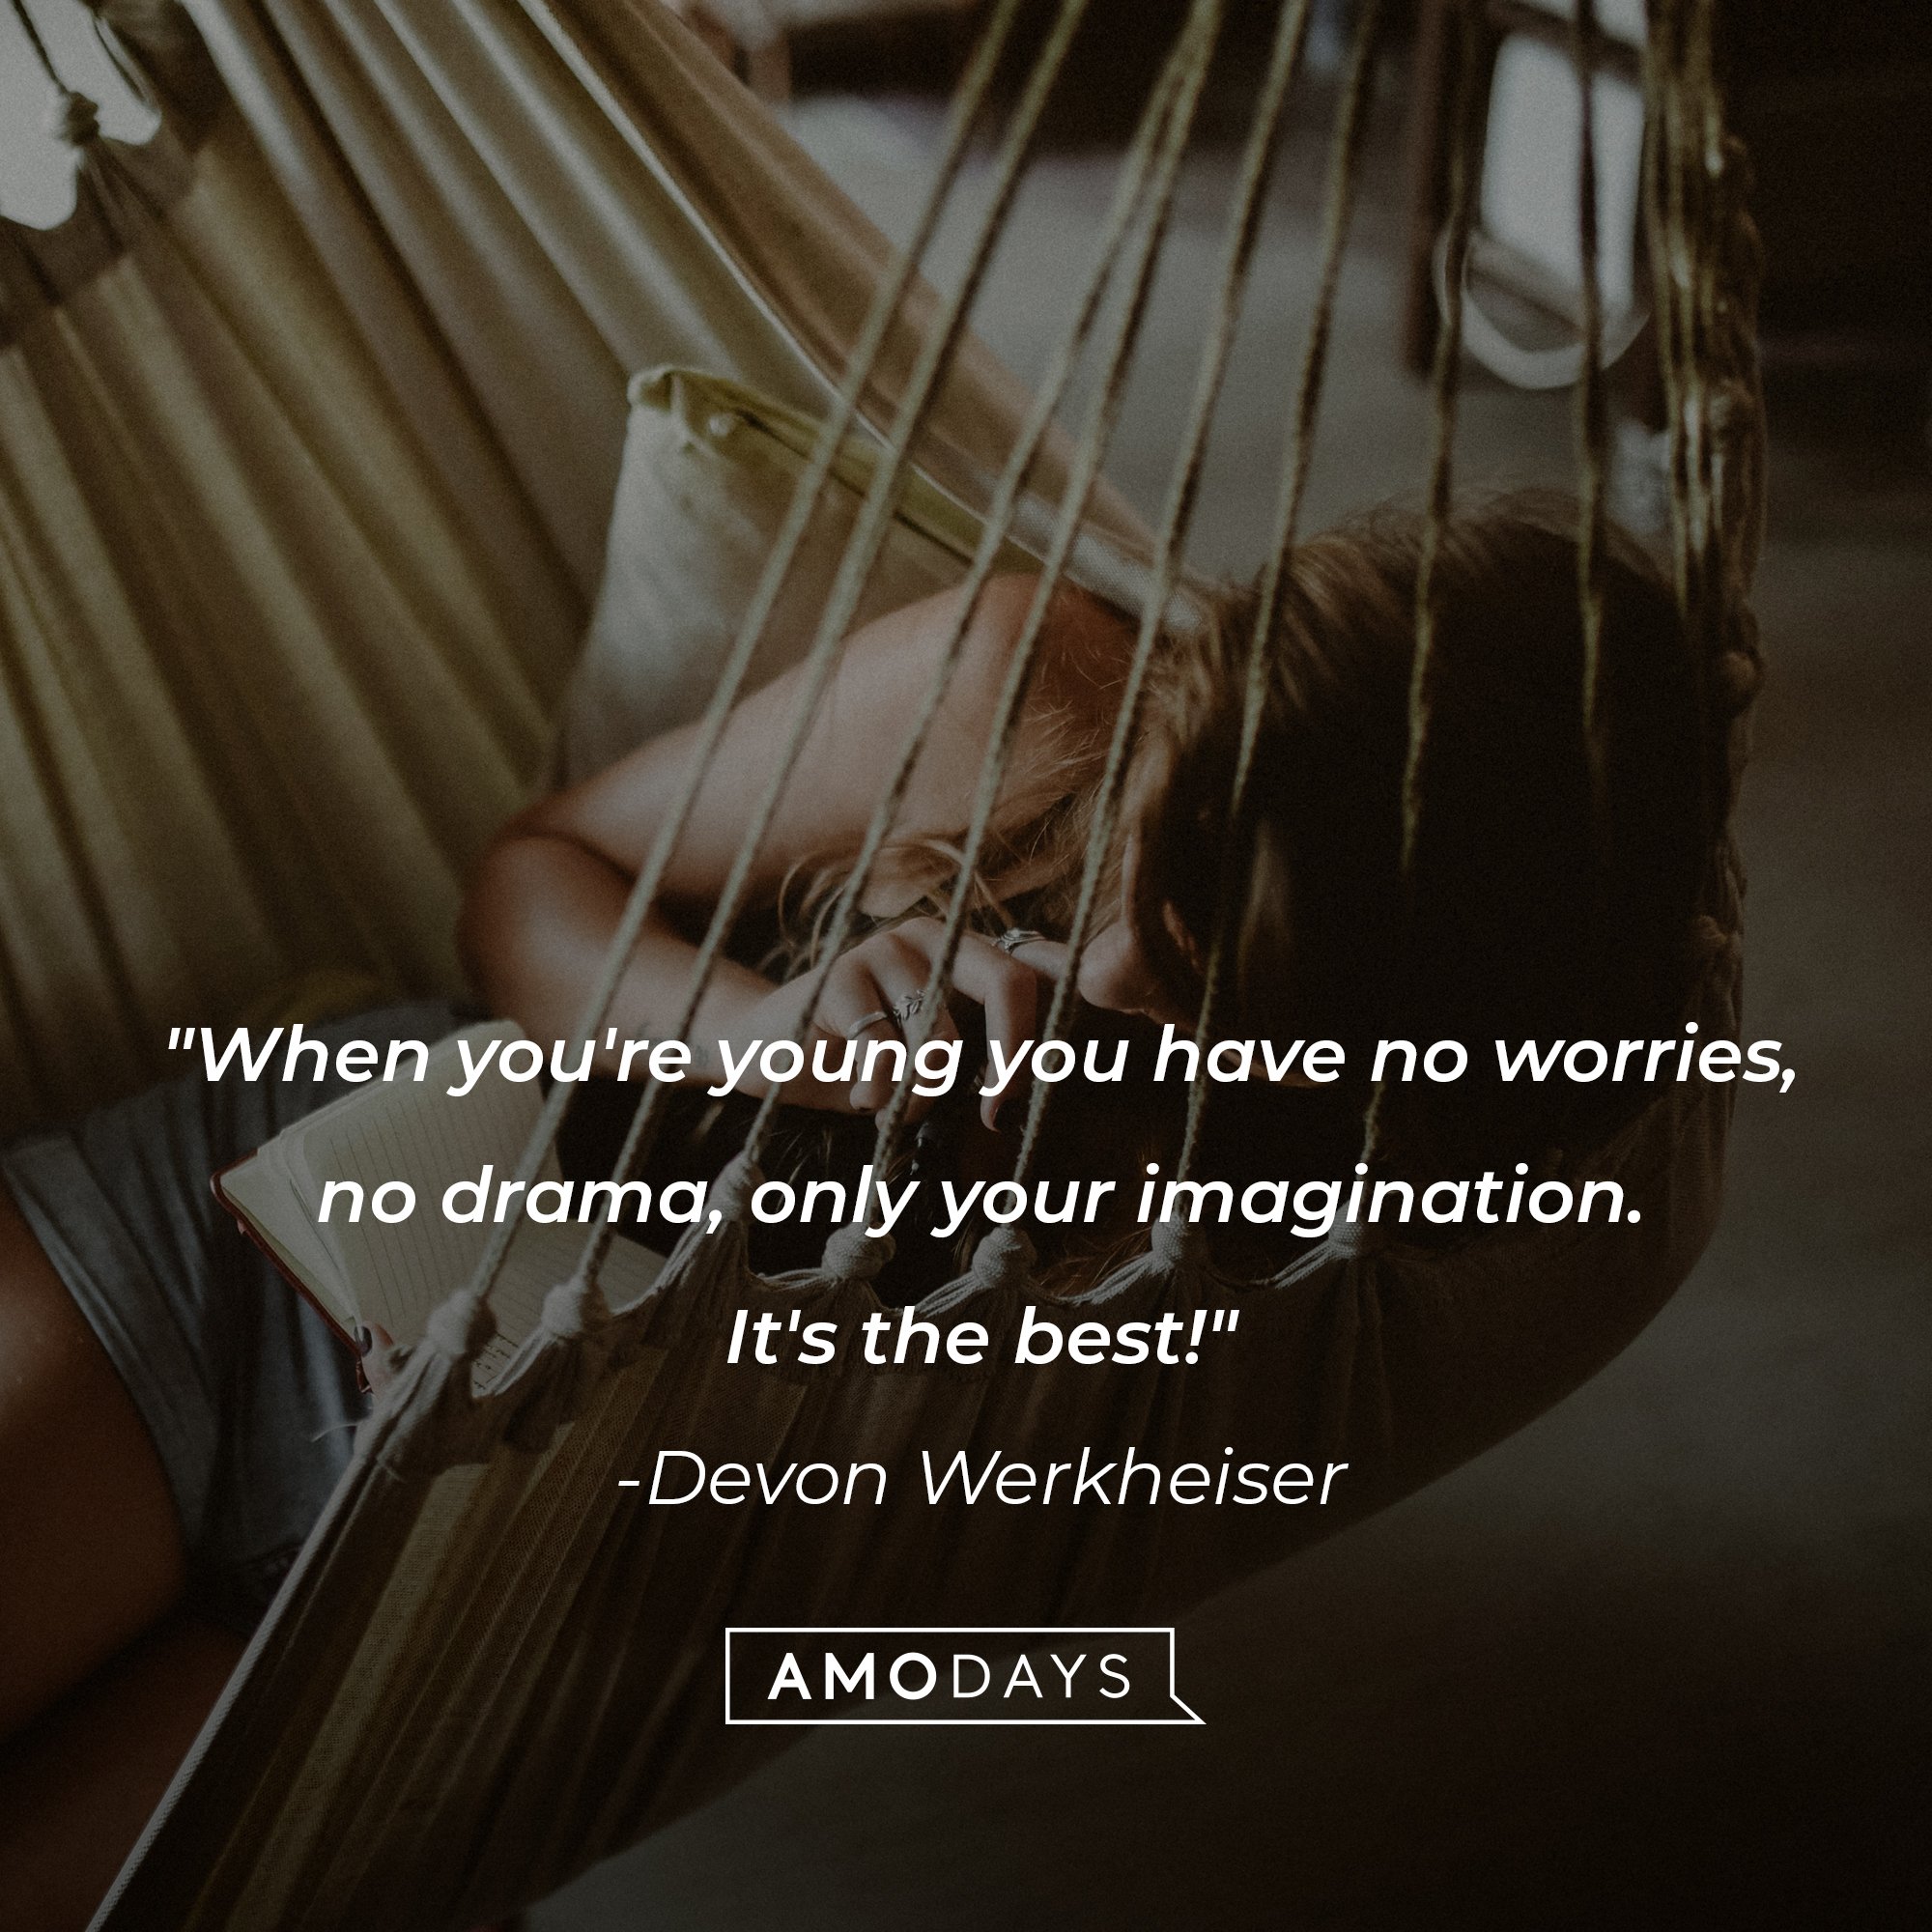 Devon Werkheiser’s quote: "When you're young you have no worries, no drama, only your imagination. It's the best!" | Image: AmoDays 